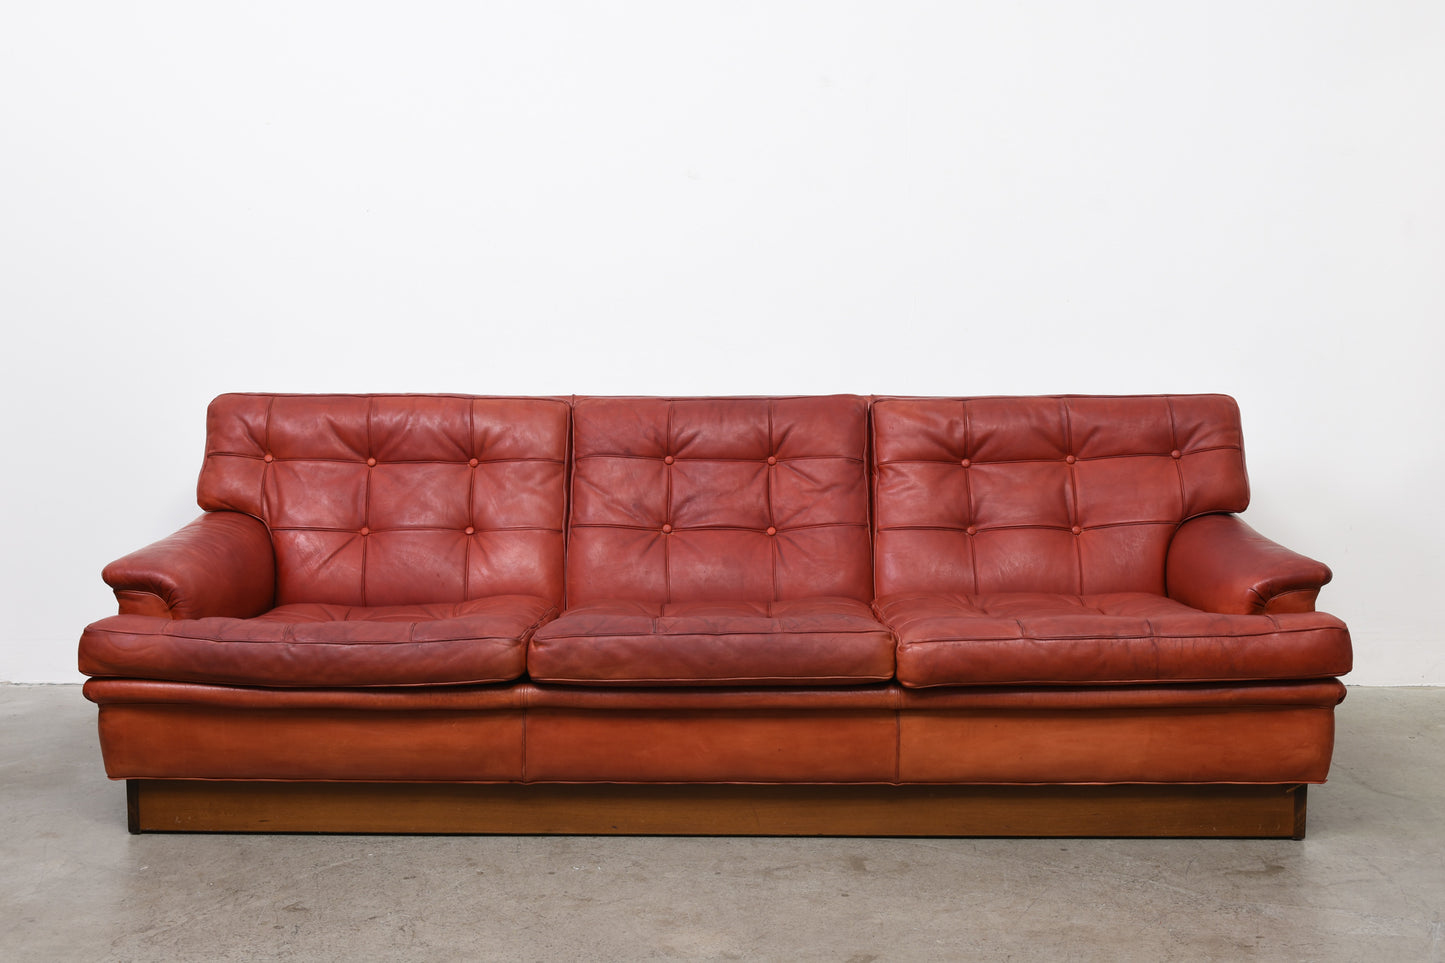 'Mexico' sofa by Arne Norell